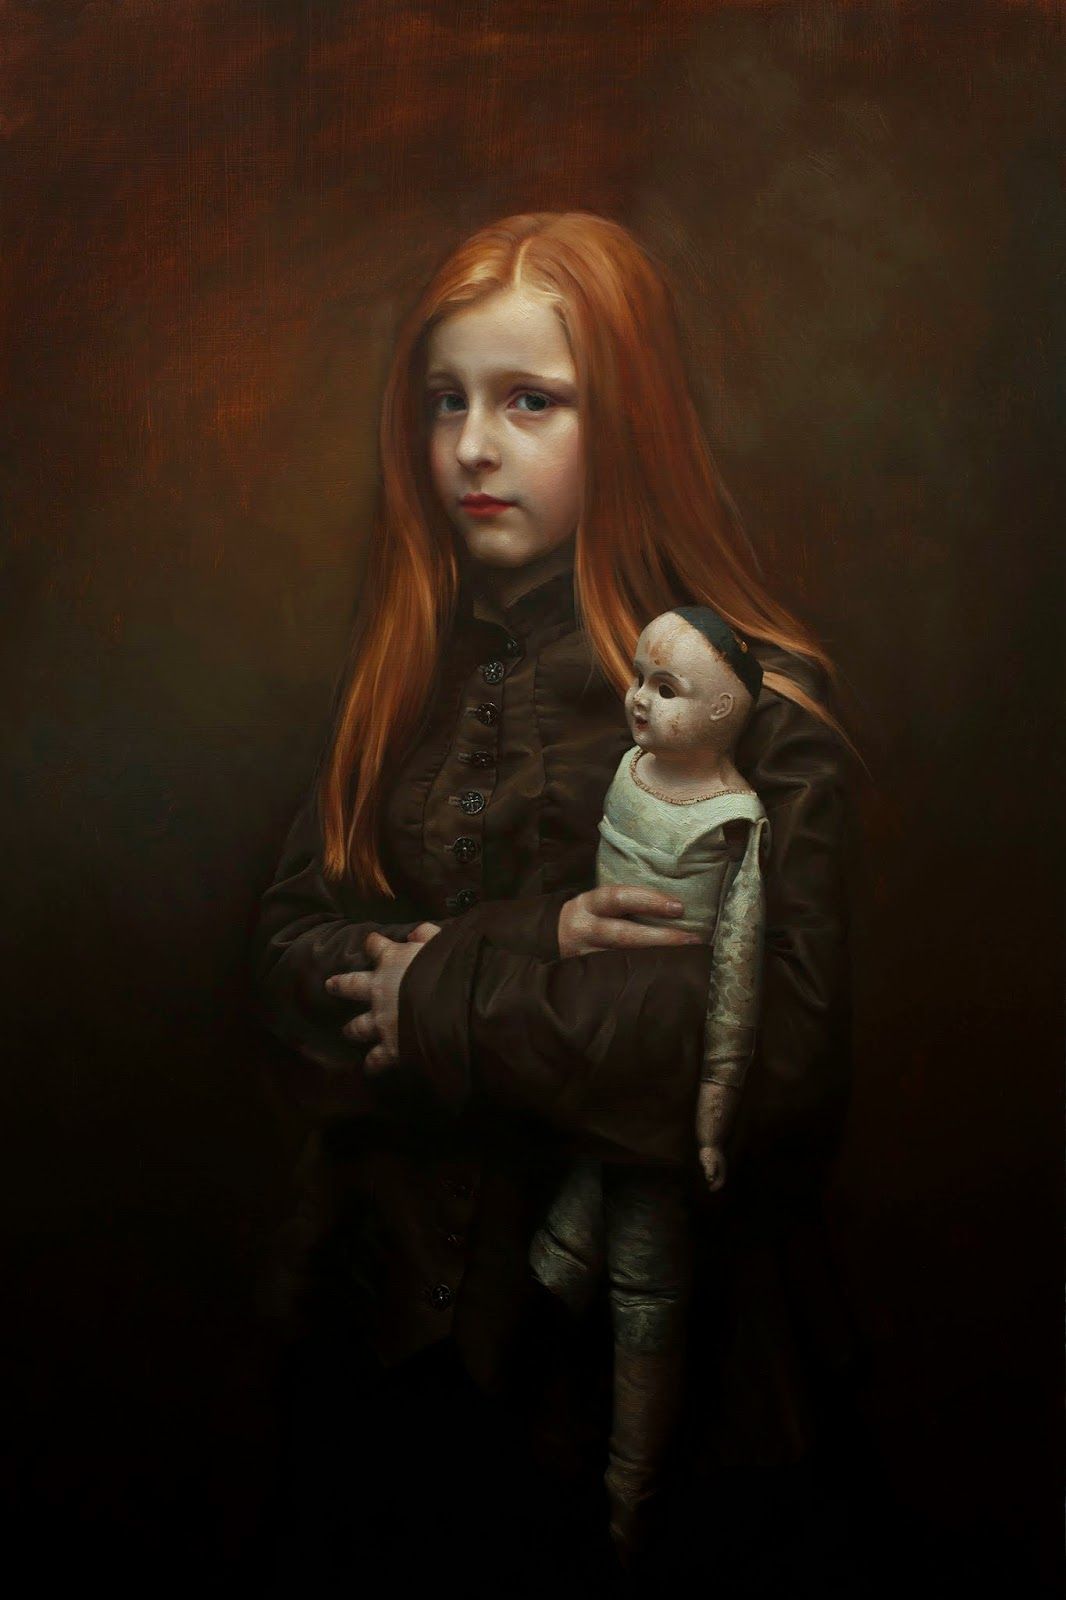 Poppet, Katherine Stone, 2015, oil on panel, 20 x 30 inches